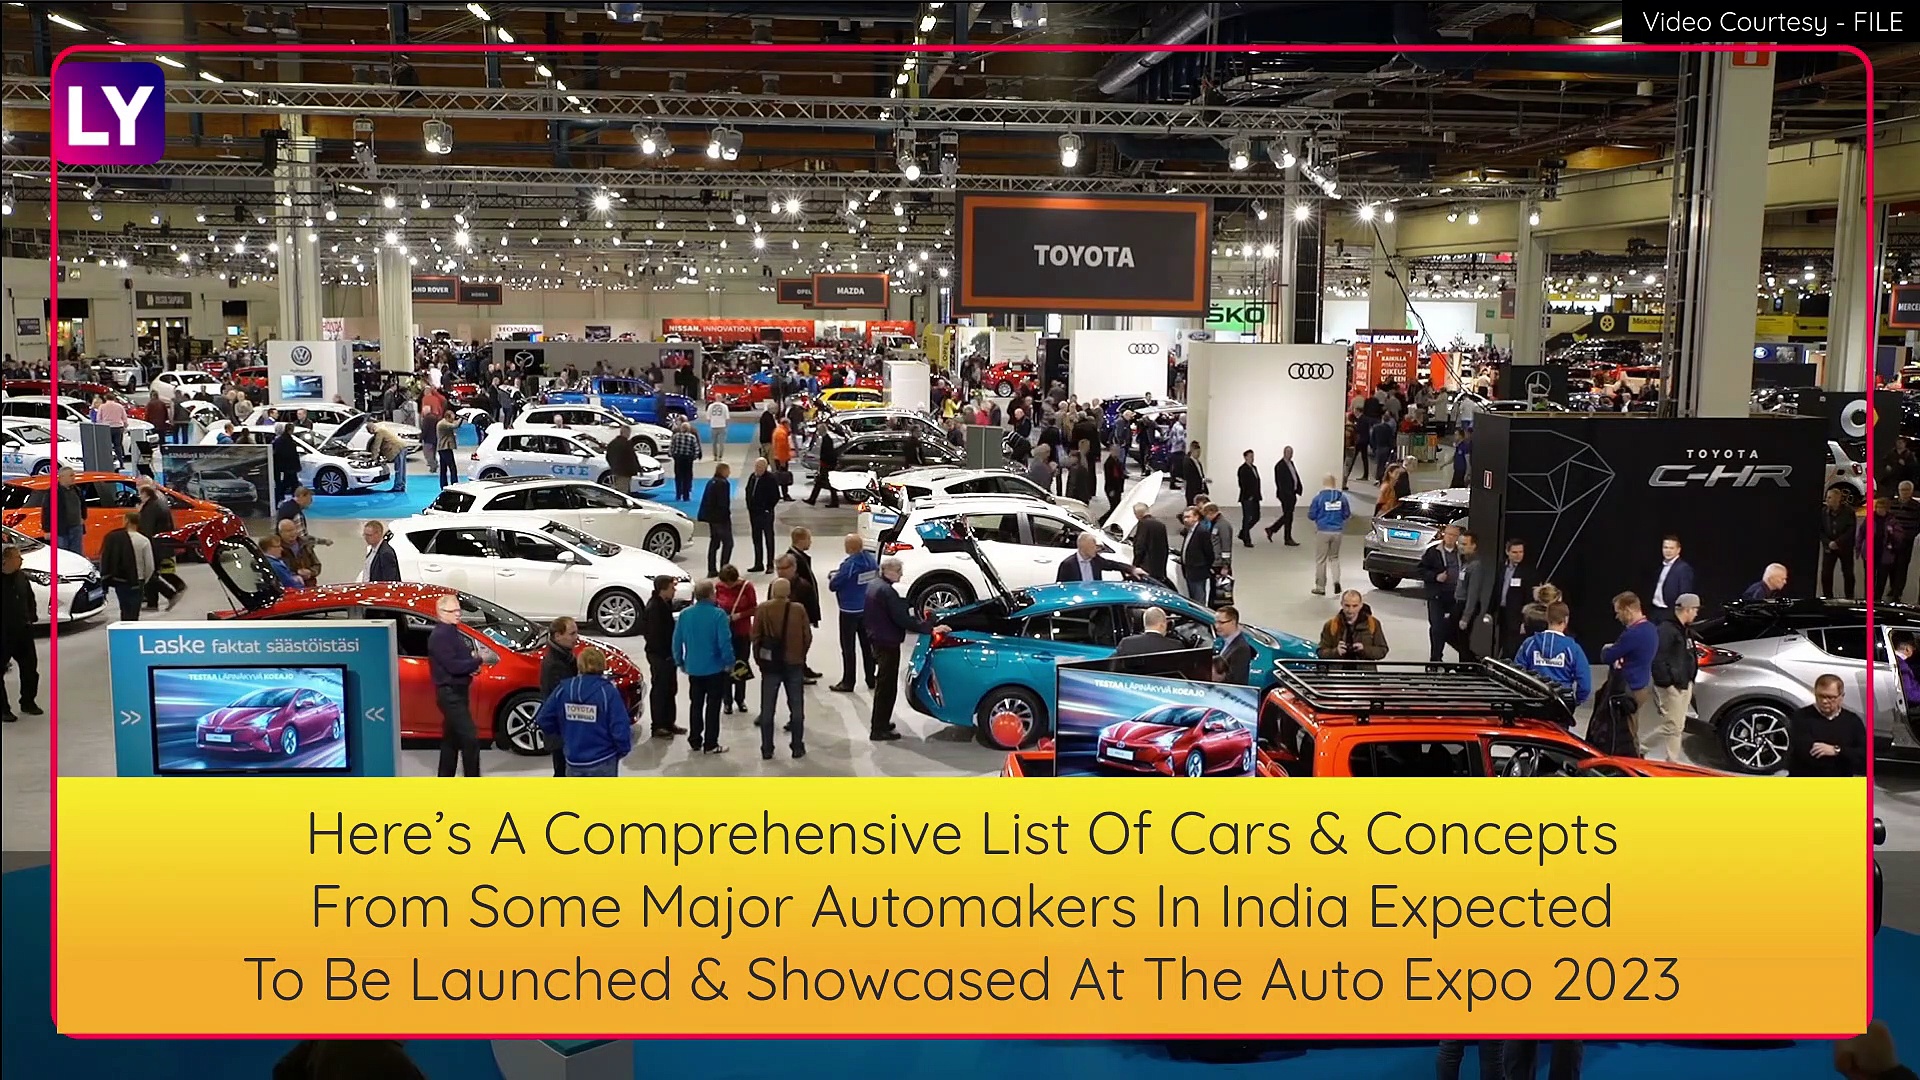 Auto Expo 2023: Look At New Car Launches, Displays & Concepts, Unveils From Top Automakers In India